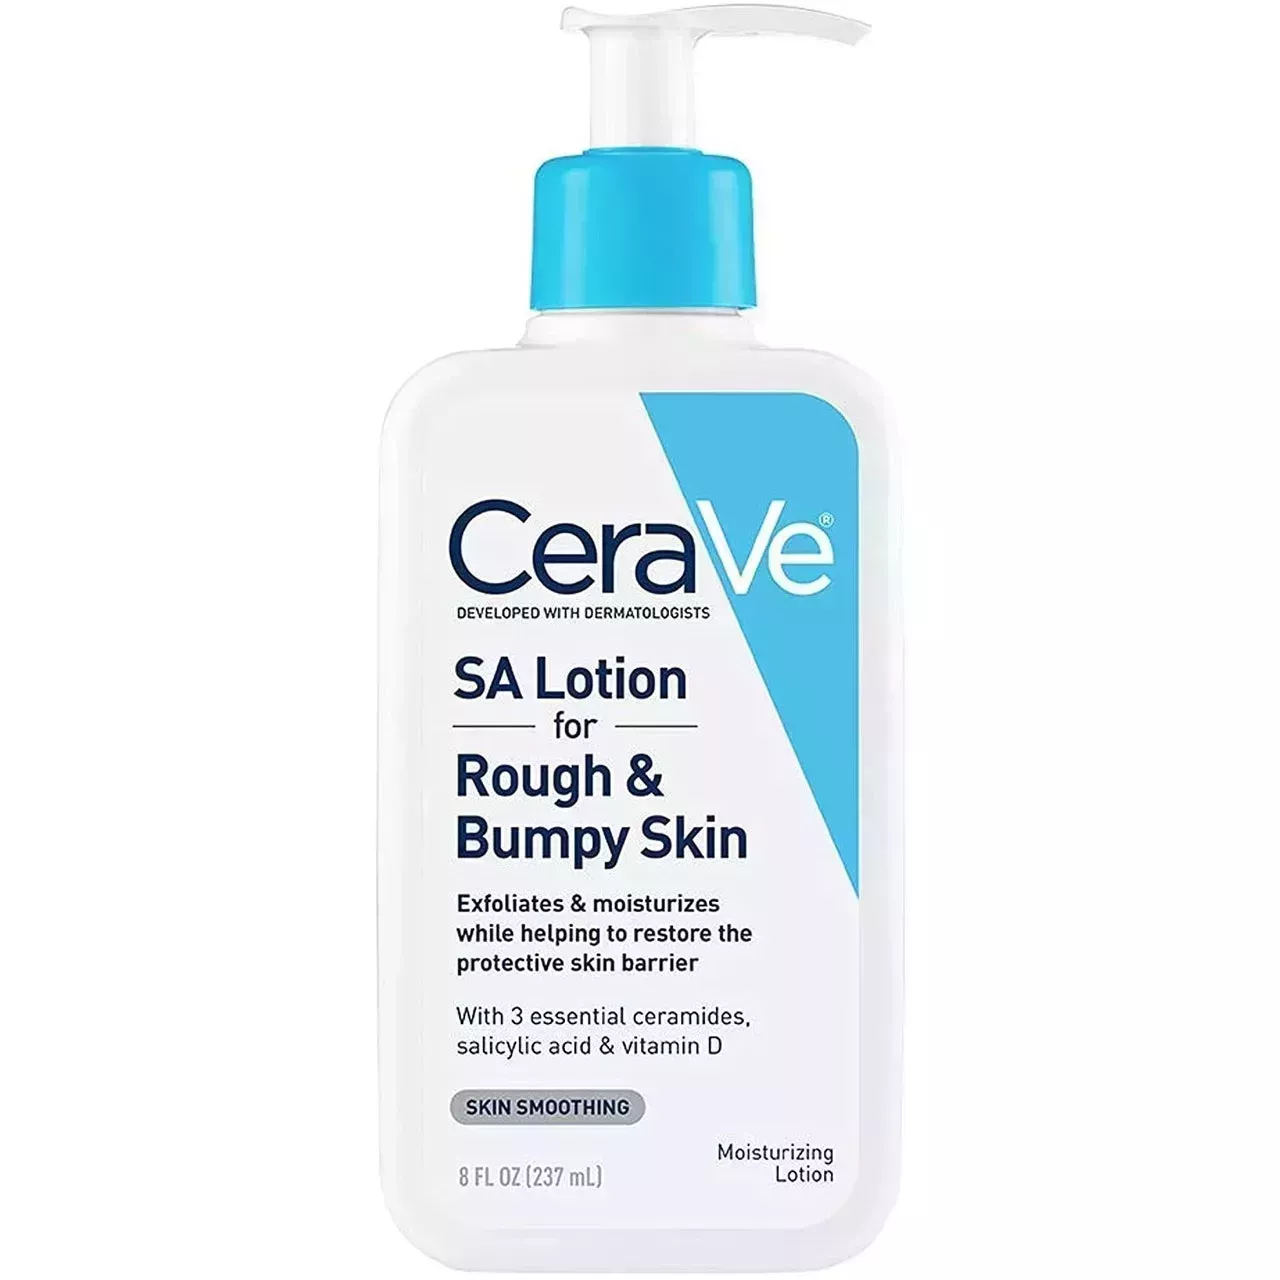 CeraVe SA Lotion For Rough & Bumpy Skin on white background